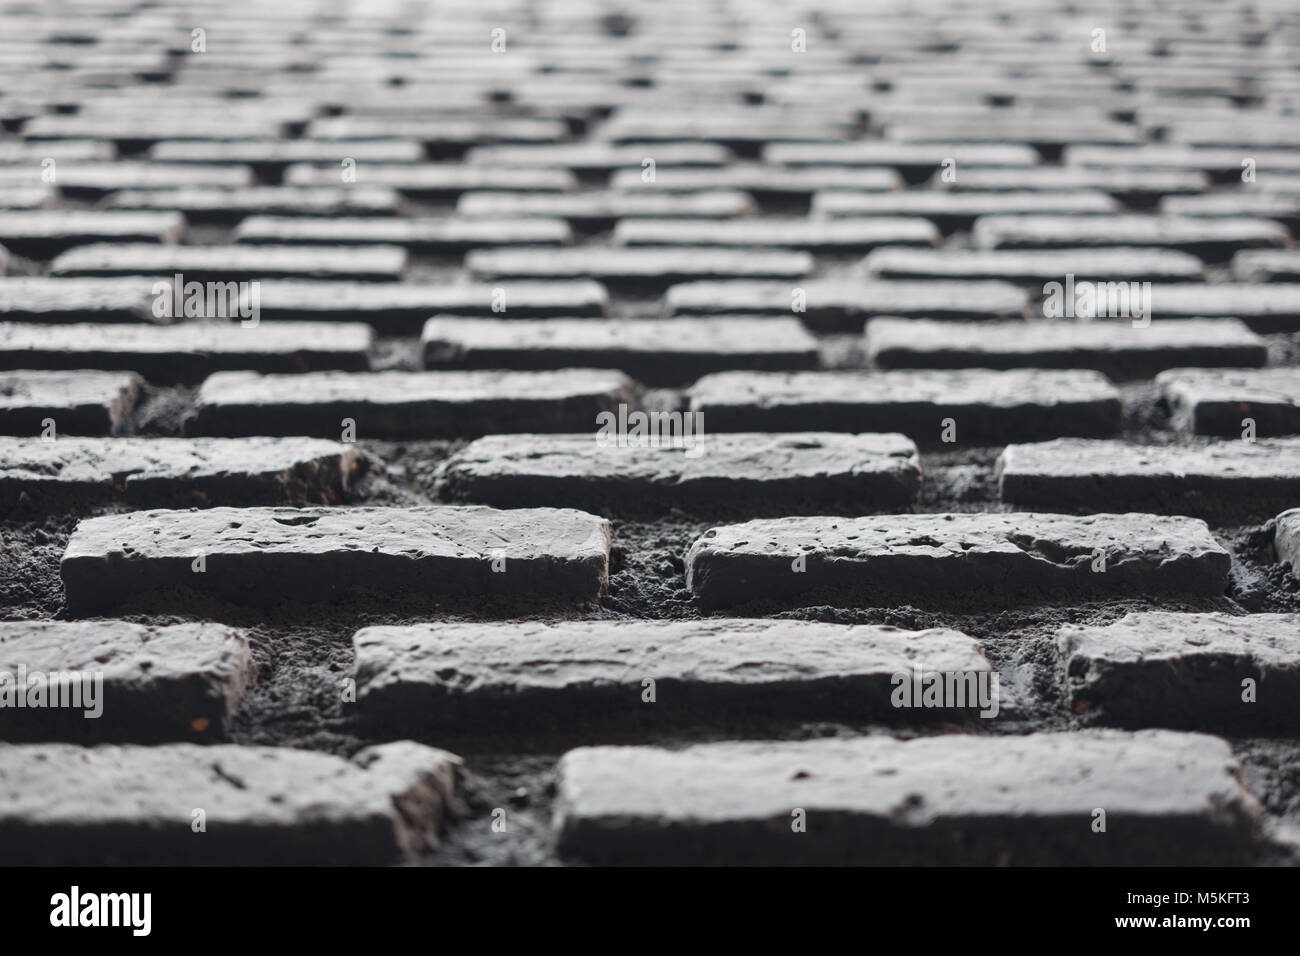 Brick in black colour work wall pattern in one point perspective view, craftmanship in construction building, selective focus. Stock Photo